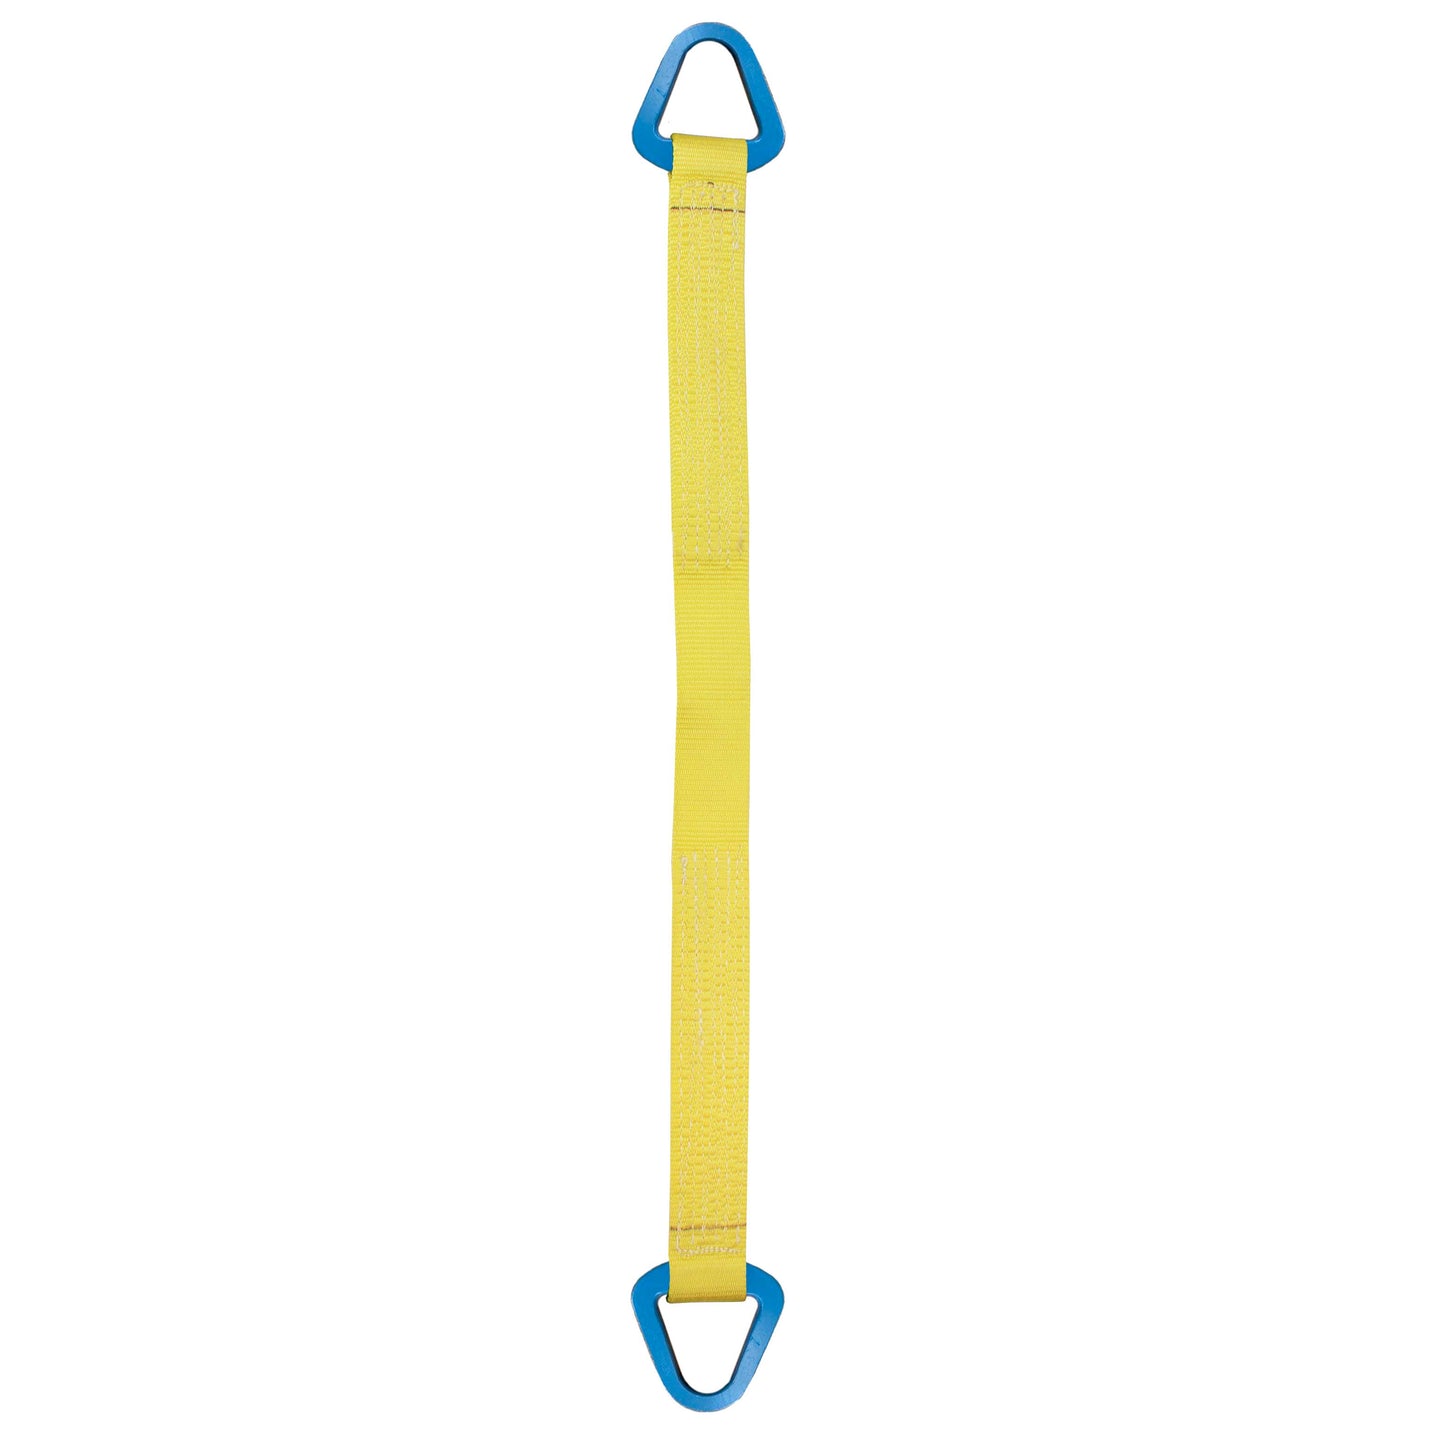 Nylon Lifting Sling Triangle 4 inch x 20 foot 1ply image 1 of 2